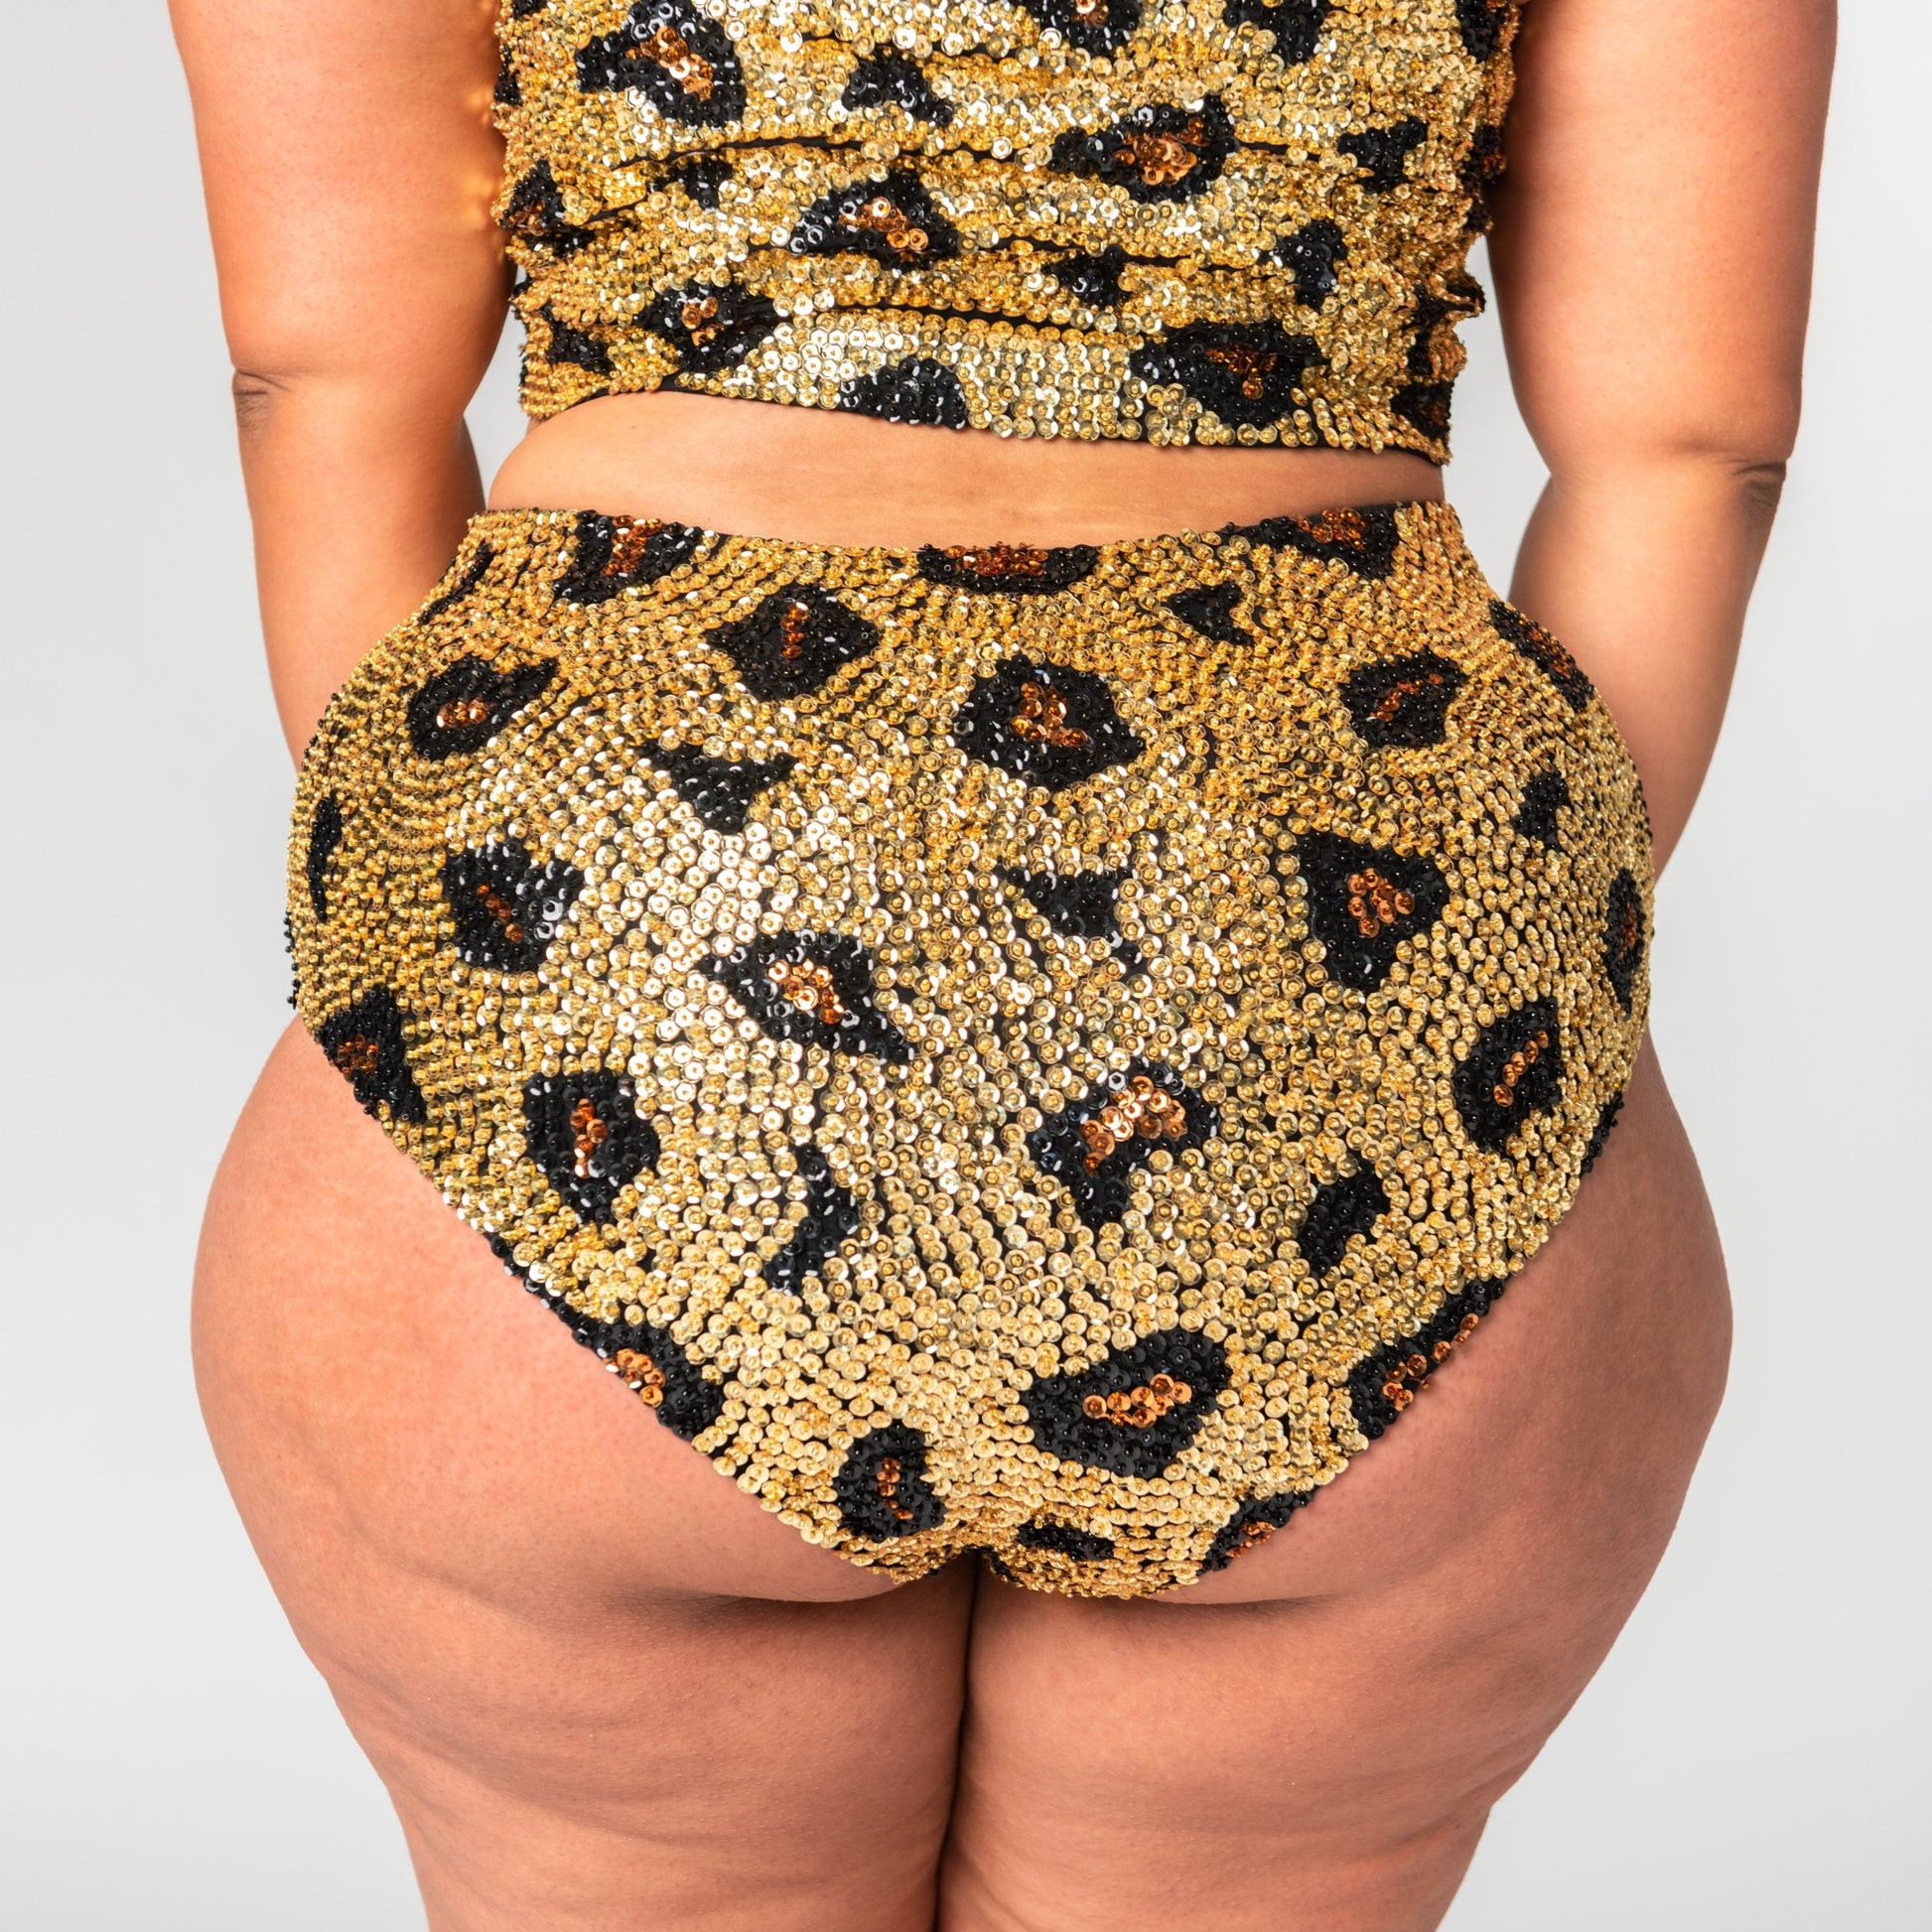 back view of high waist festival hot pants in gold leopard print design on plus size model.